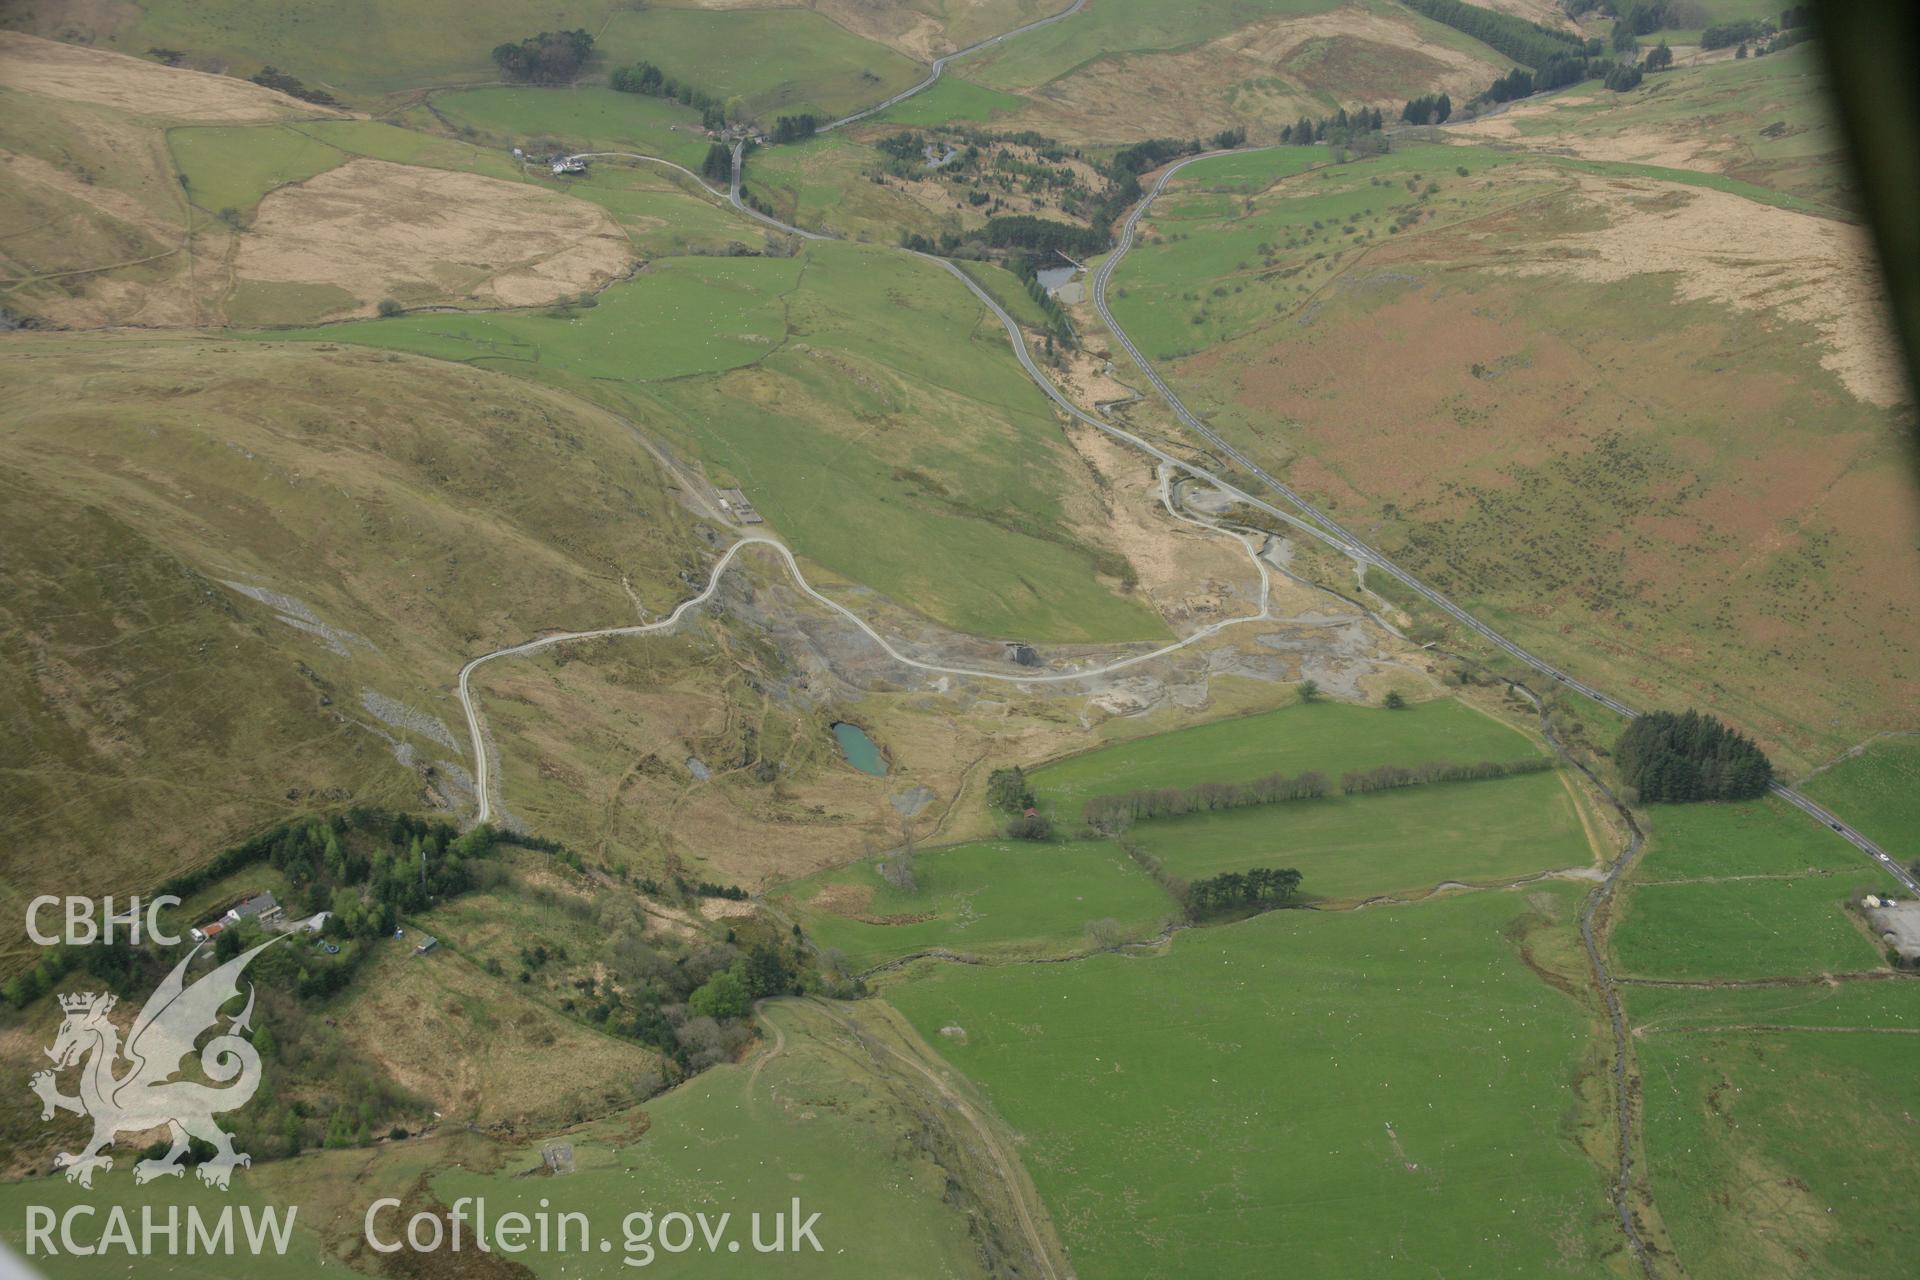 RCAHMW colour oblique aerial photograph of Castell Mine. Taken on 17 April 2007 by Toby Driver